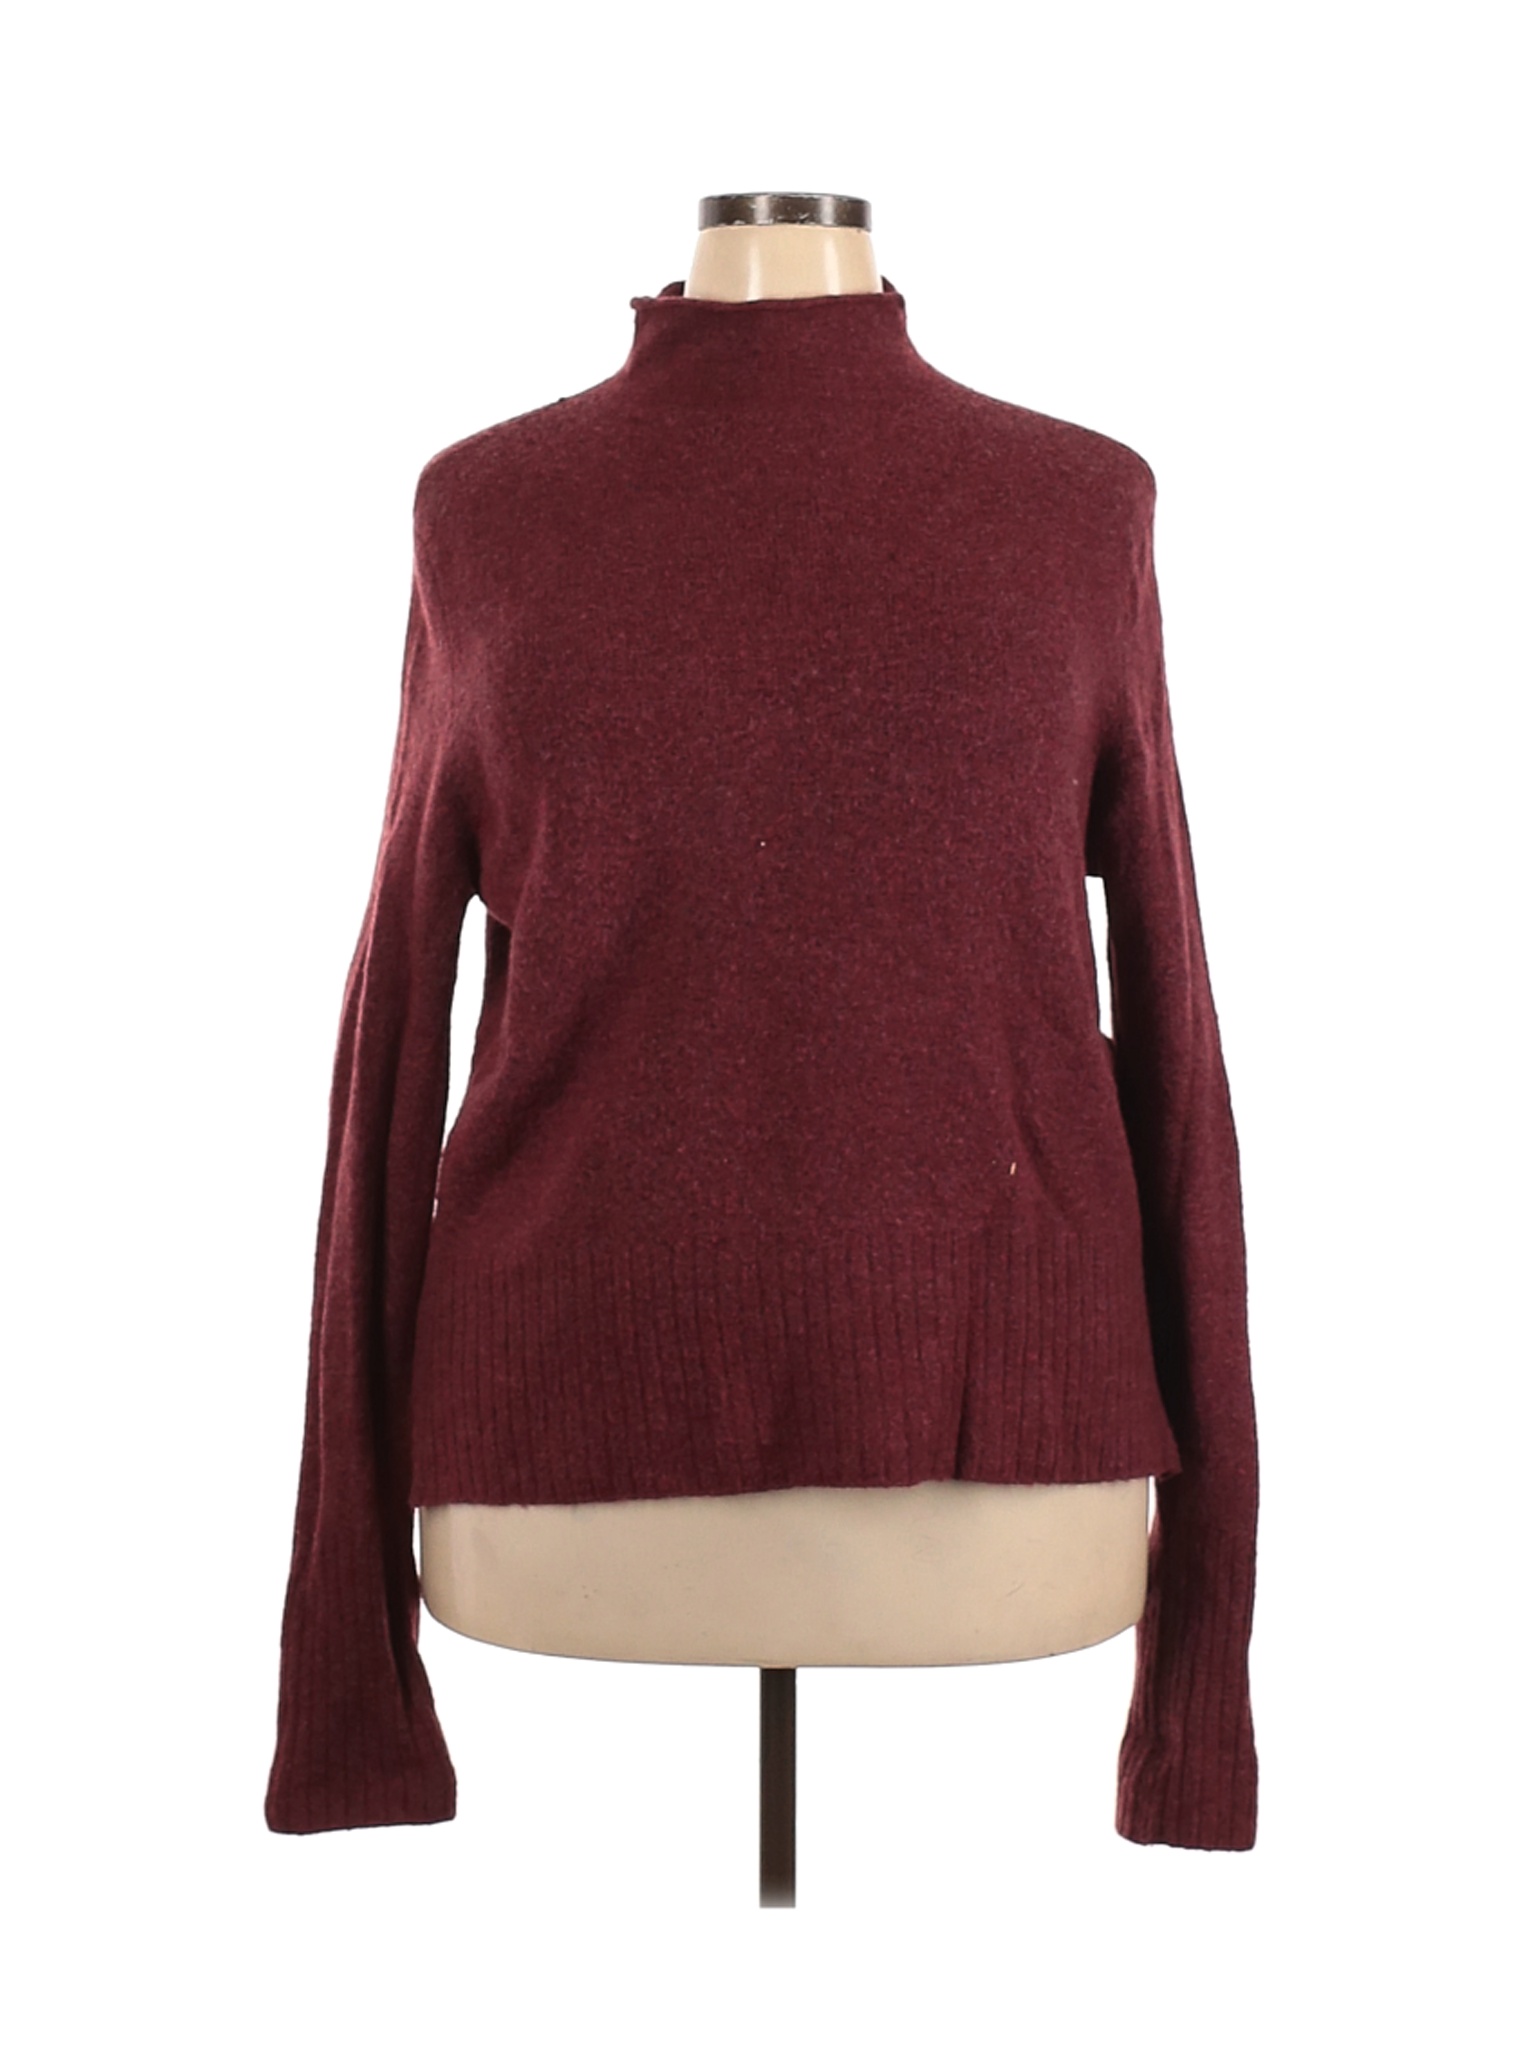 Madewell Women Red Pullover Sweater 2X Plus | eBay